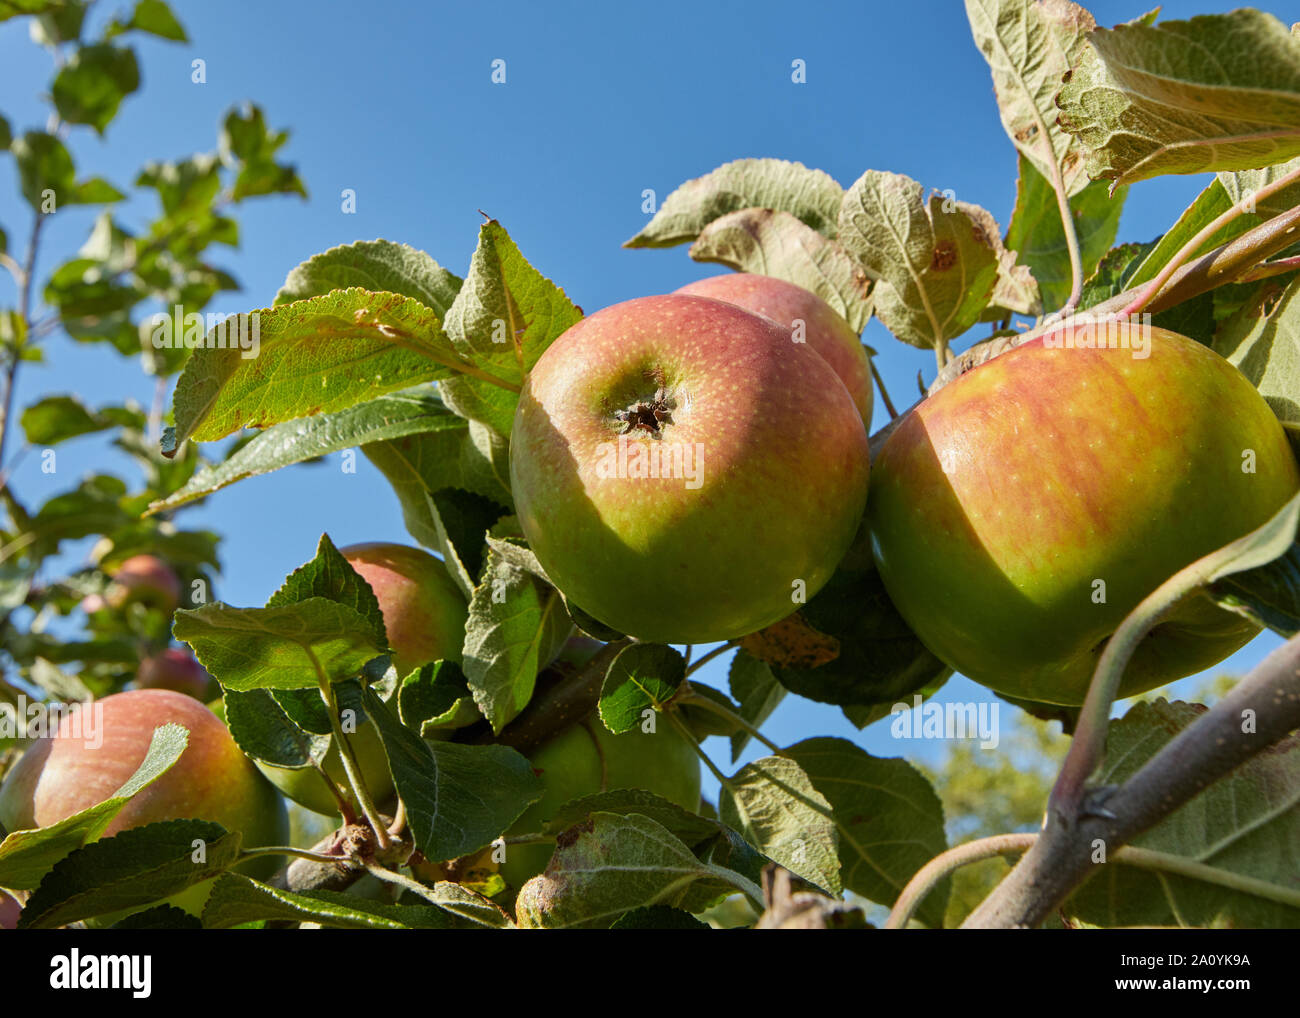 Vibrant green and red apples growing in a sunny orchard. Stock Photo